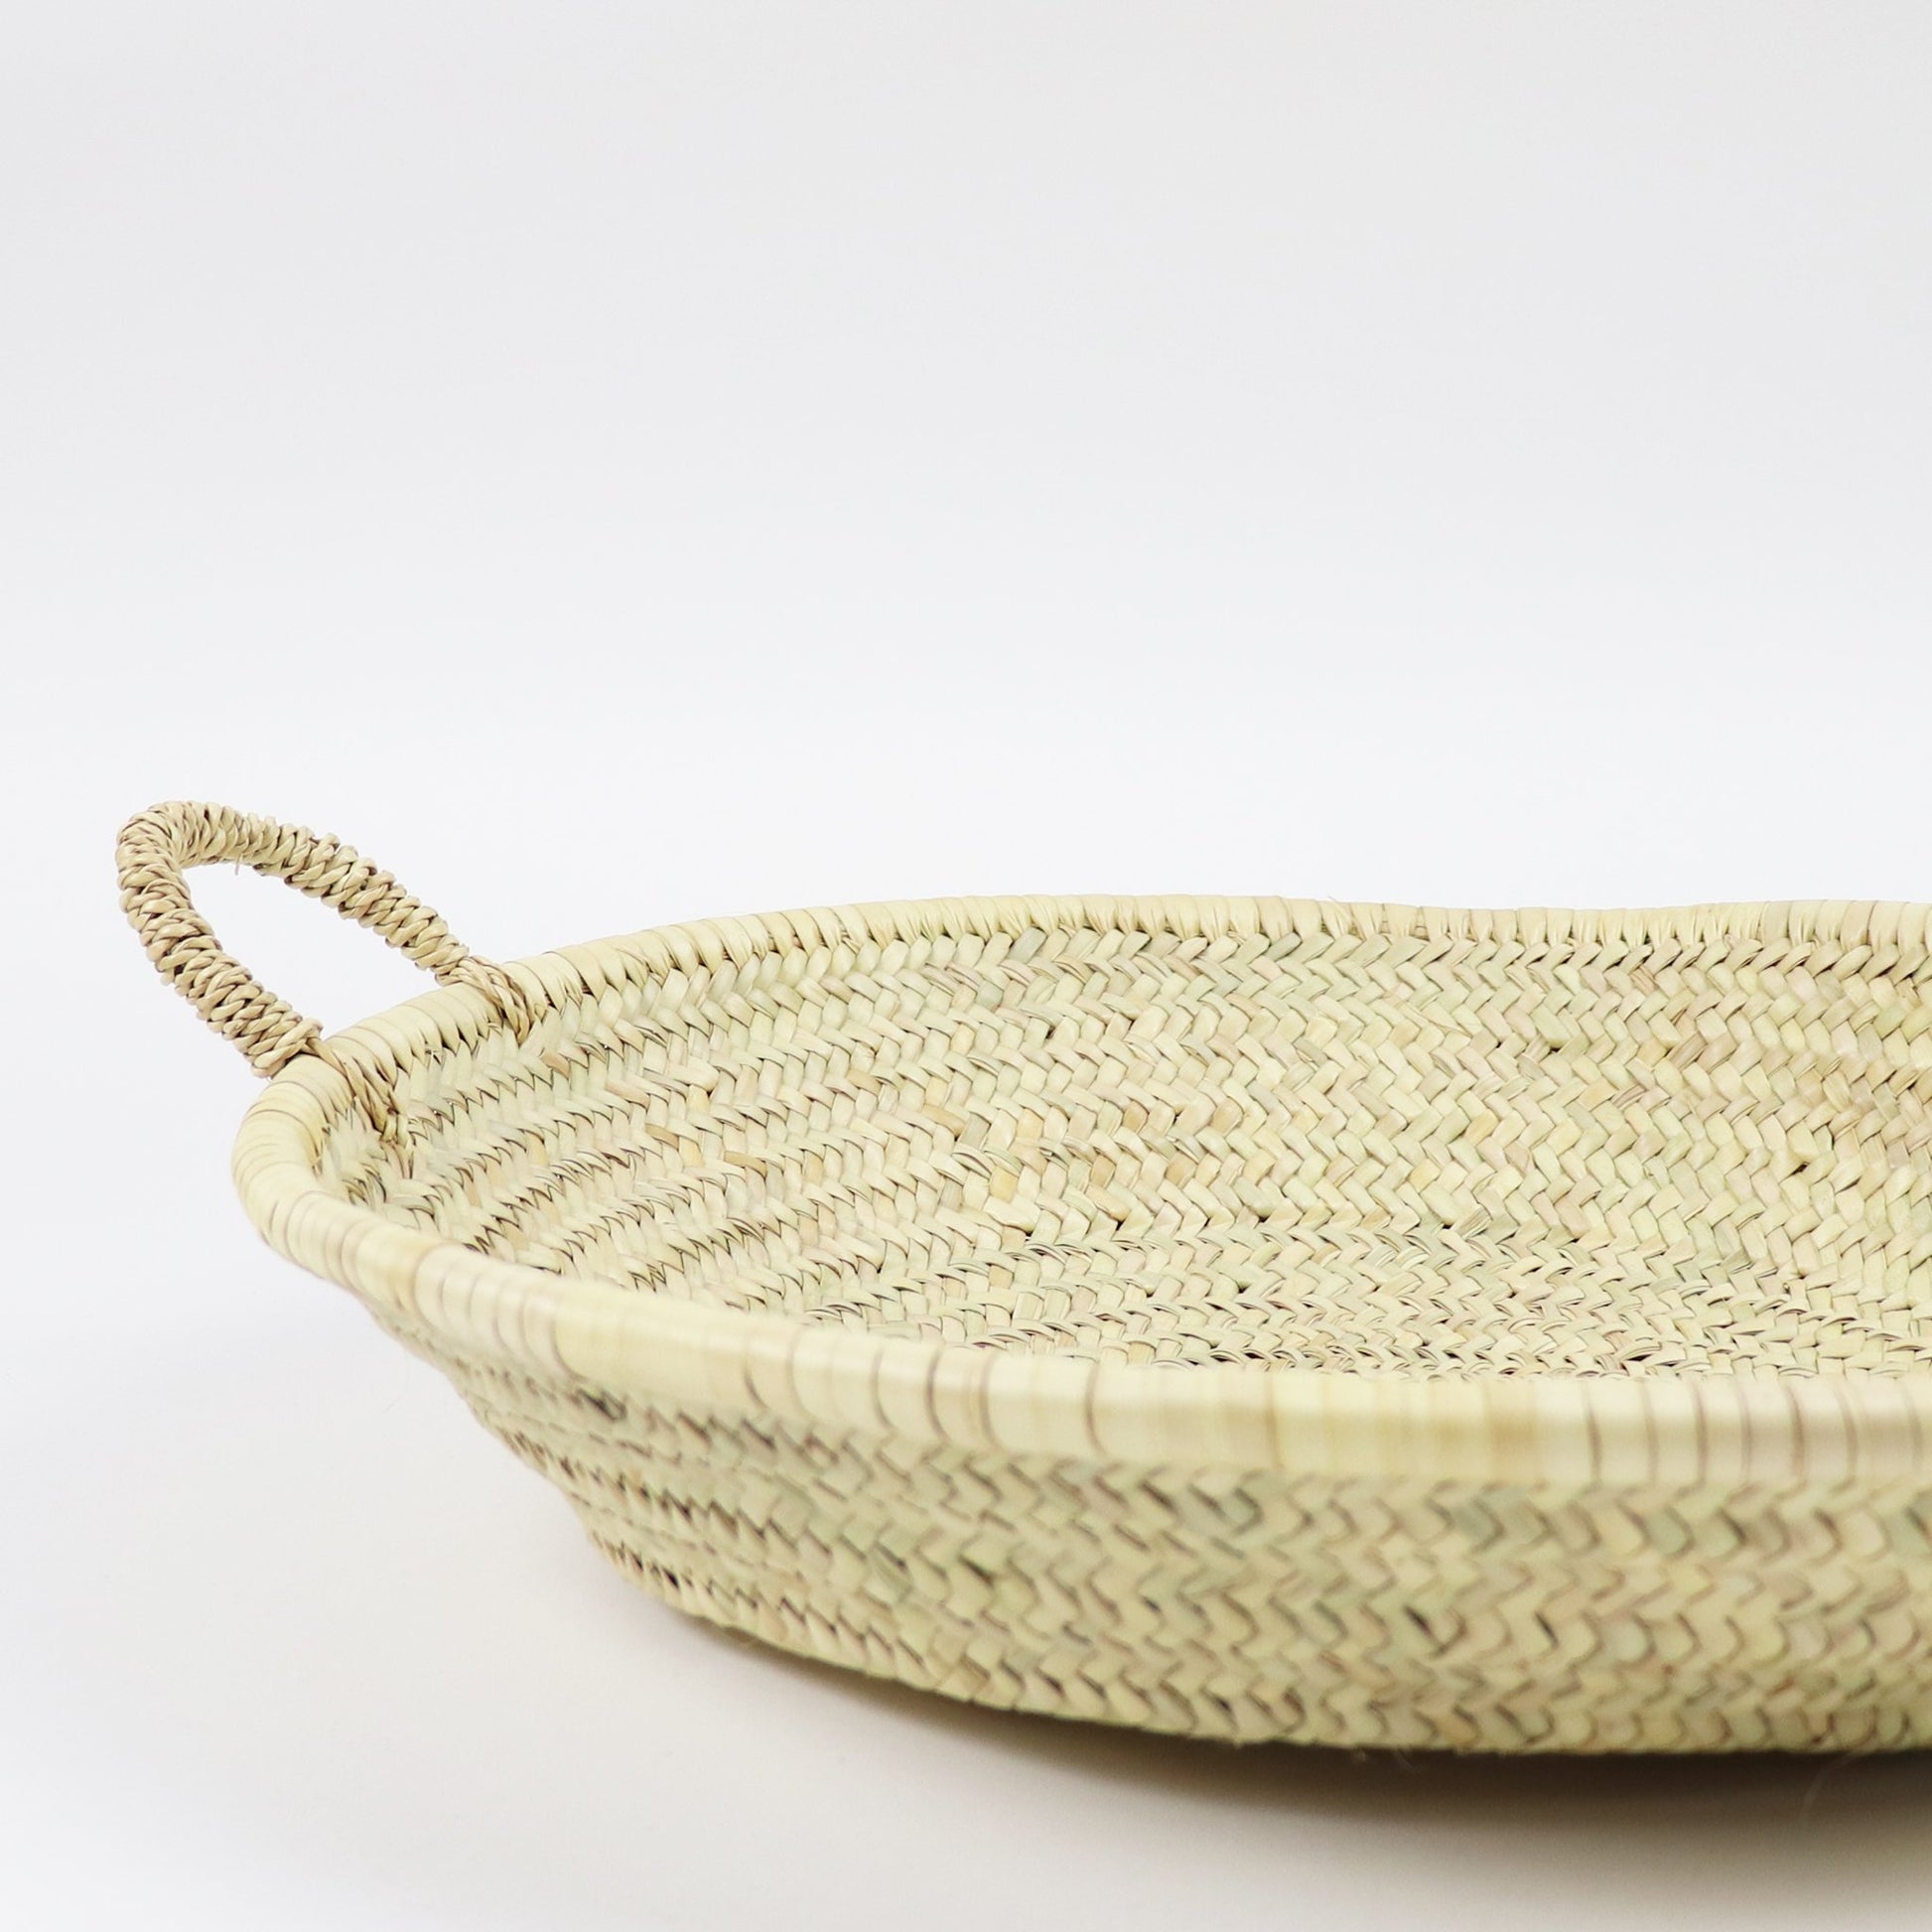 Woven plate in natural color made from palm leaf 